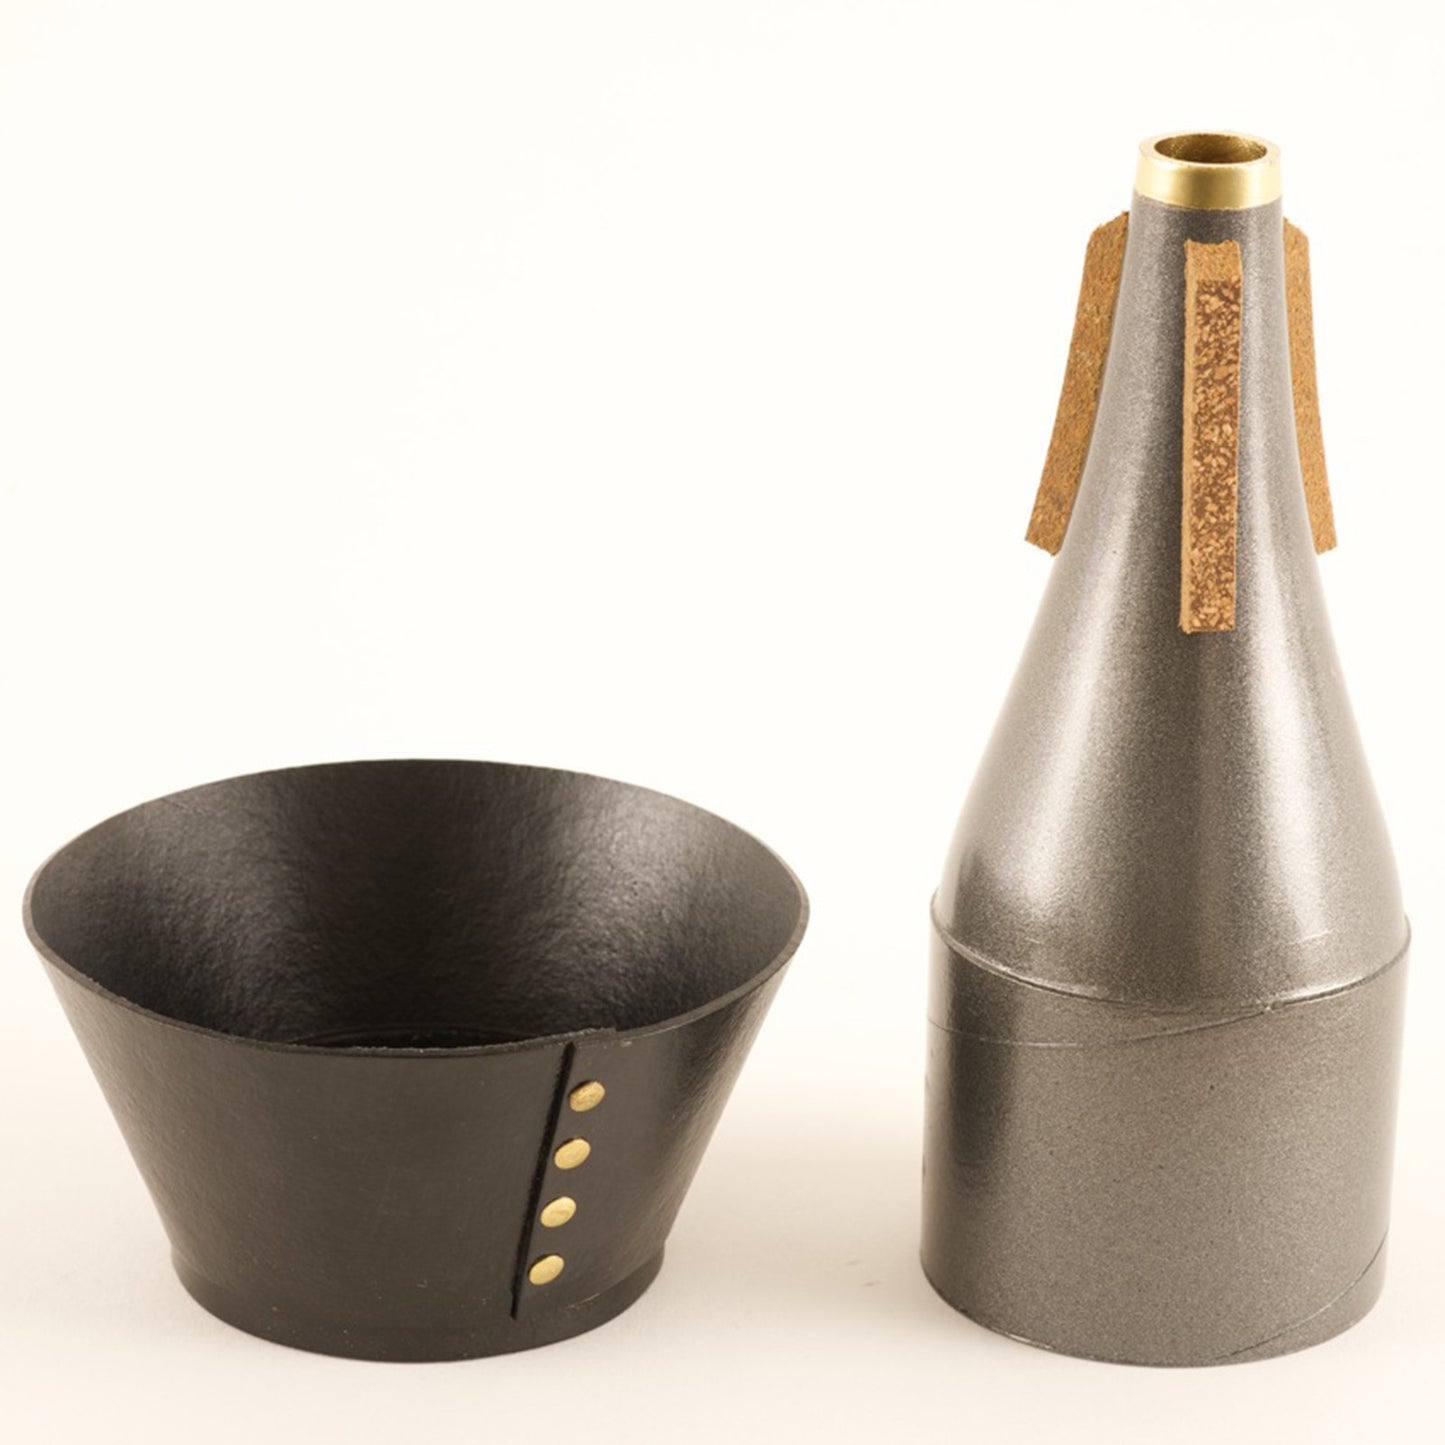 Soulo Trumpet Adjustable Cup Mute